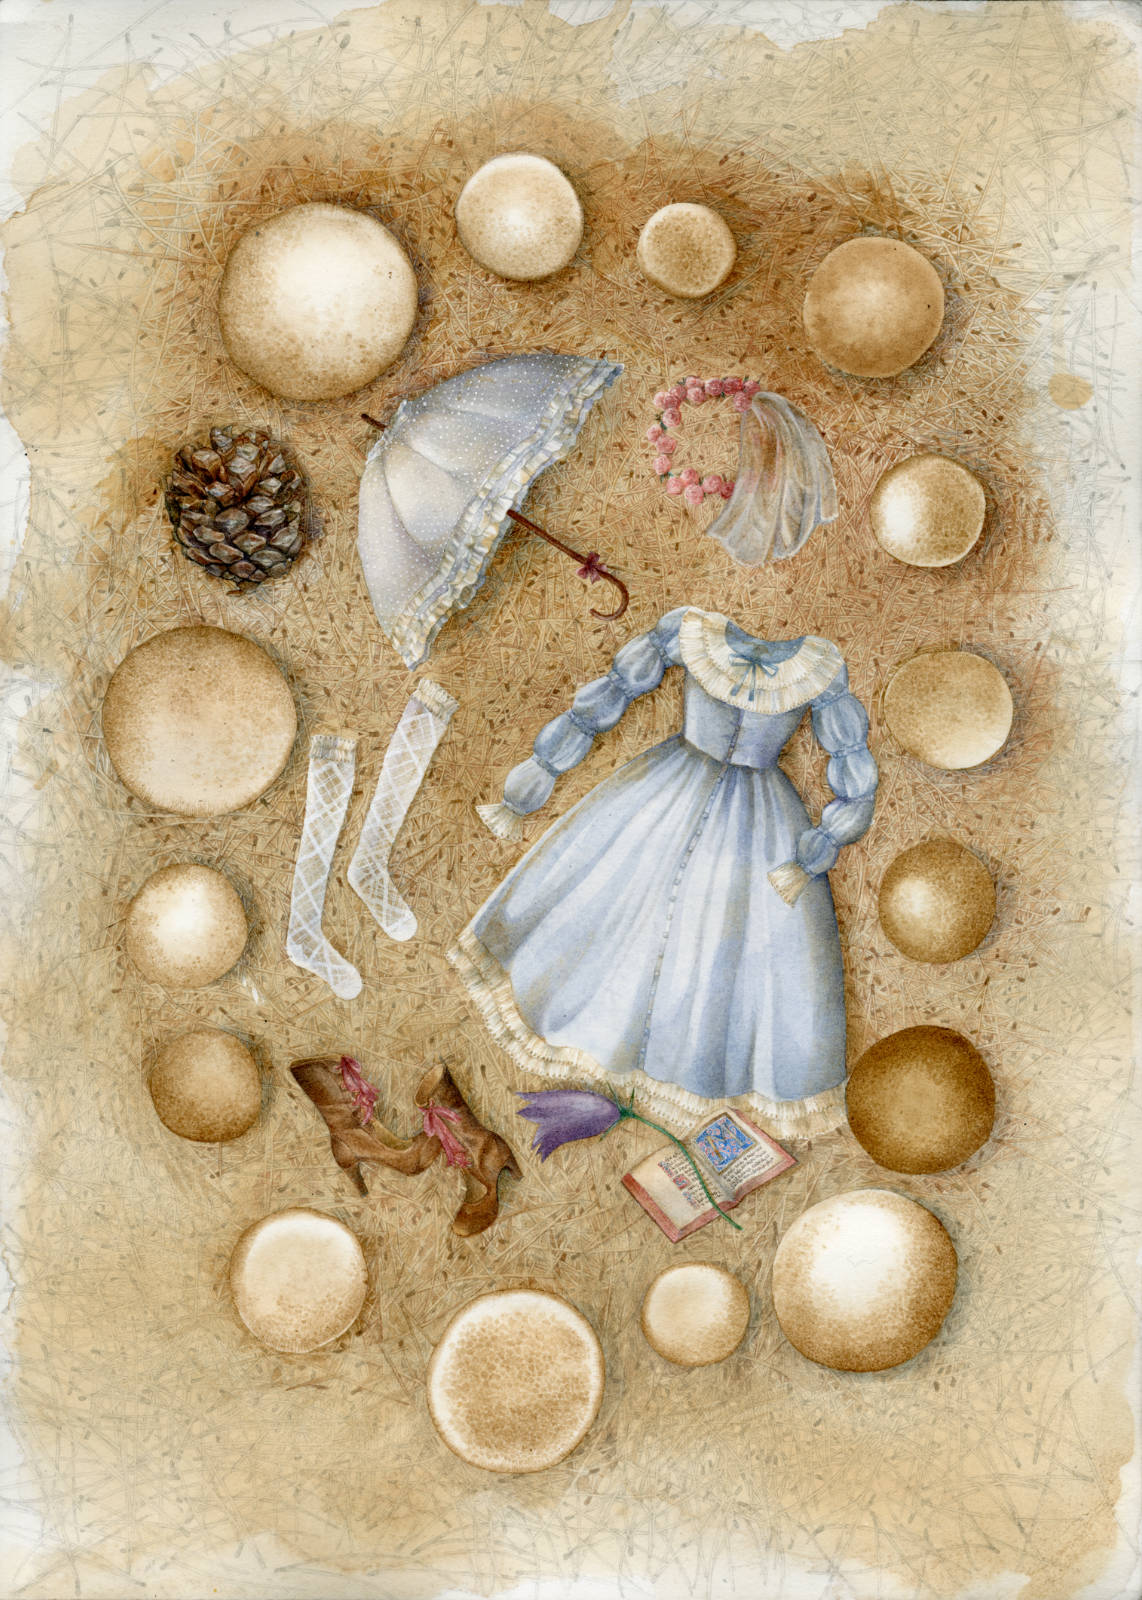 Fairy ring enclosing a fashionable composition of classic lolita clothing and interests laid on a pine needles bed, such as pine cones and bluebells collected in the wild, a medieval book with an illumination, boots, an umbrella and a flower crown.